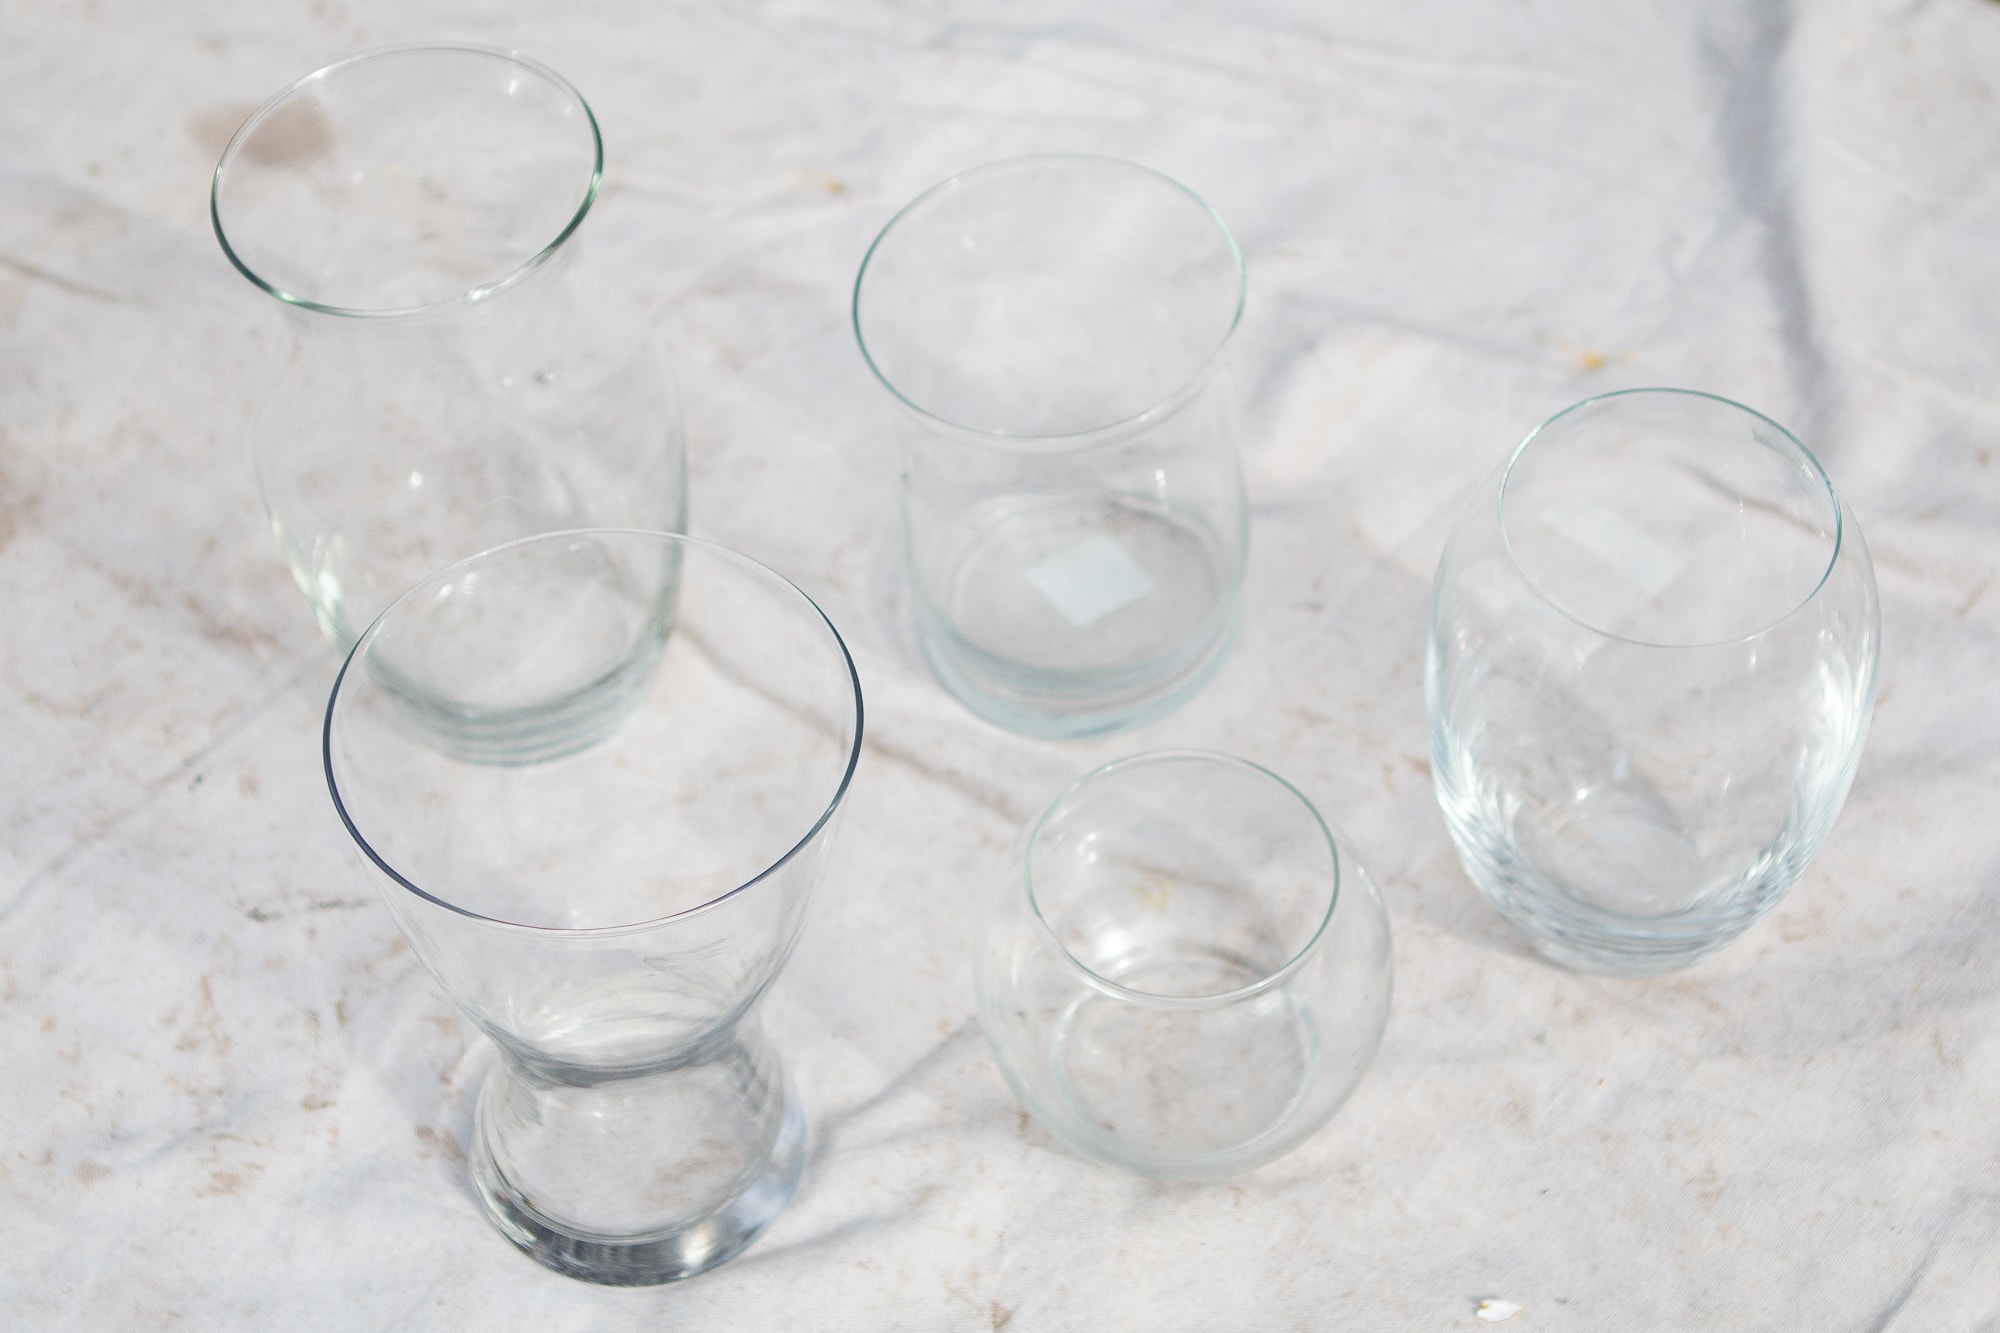 Clear cheap vases from Salvation Army